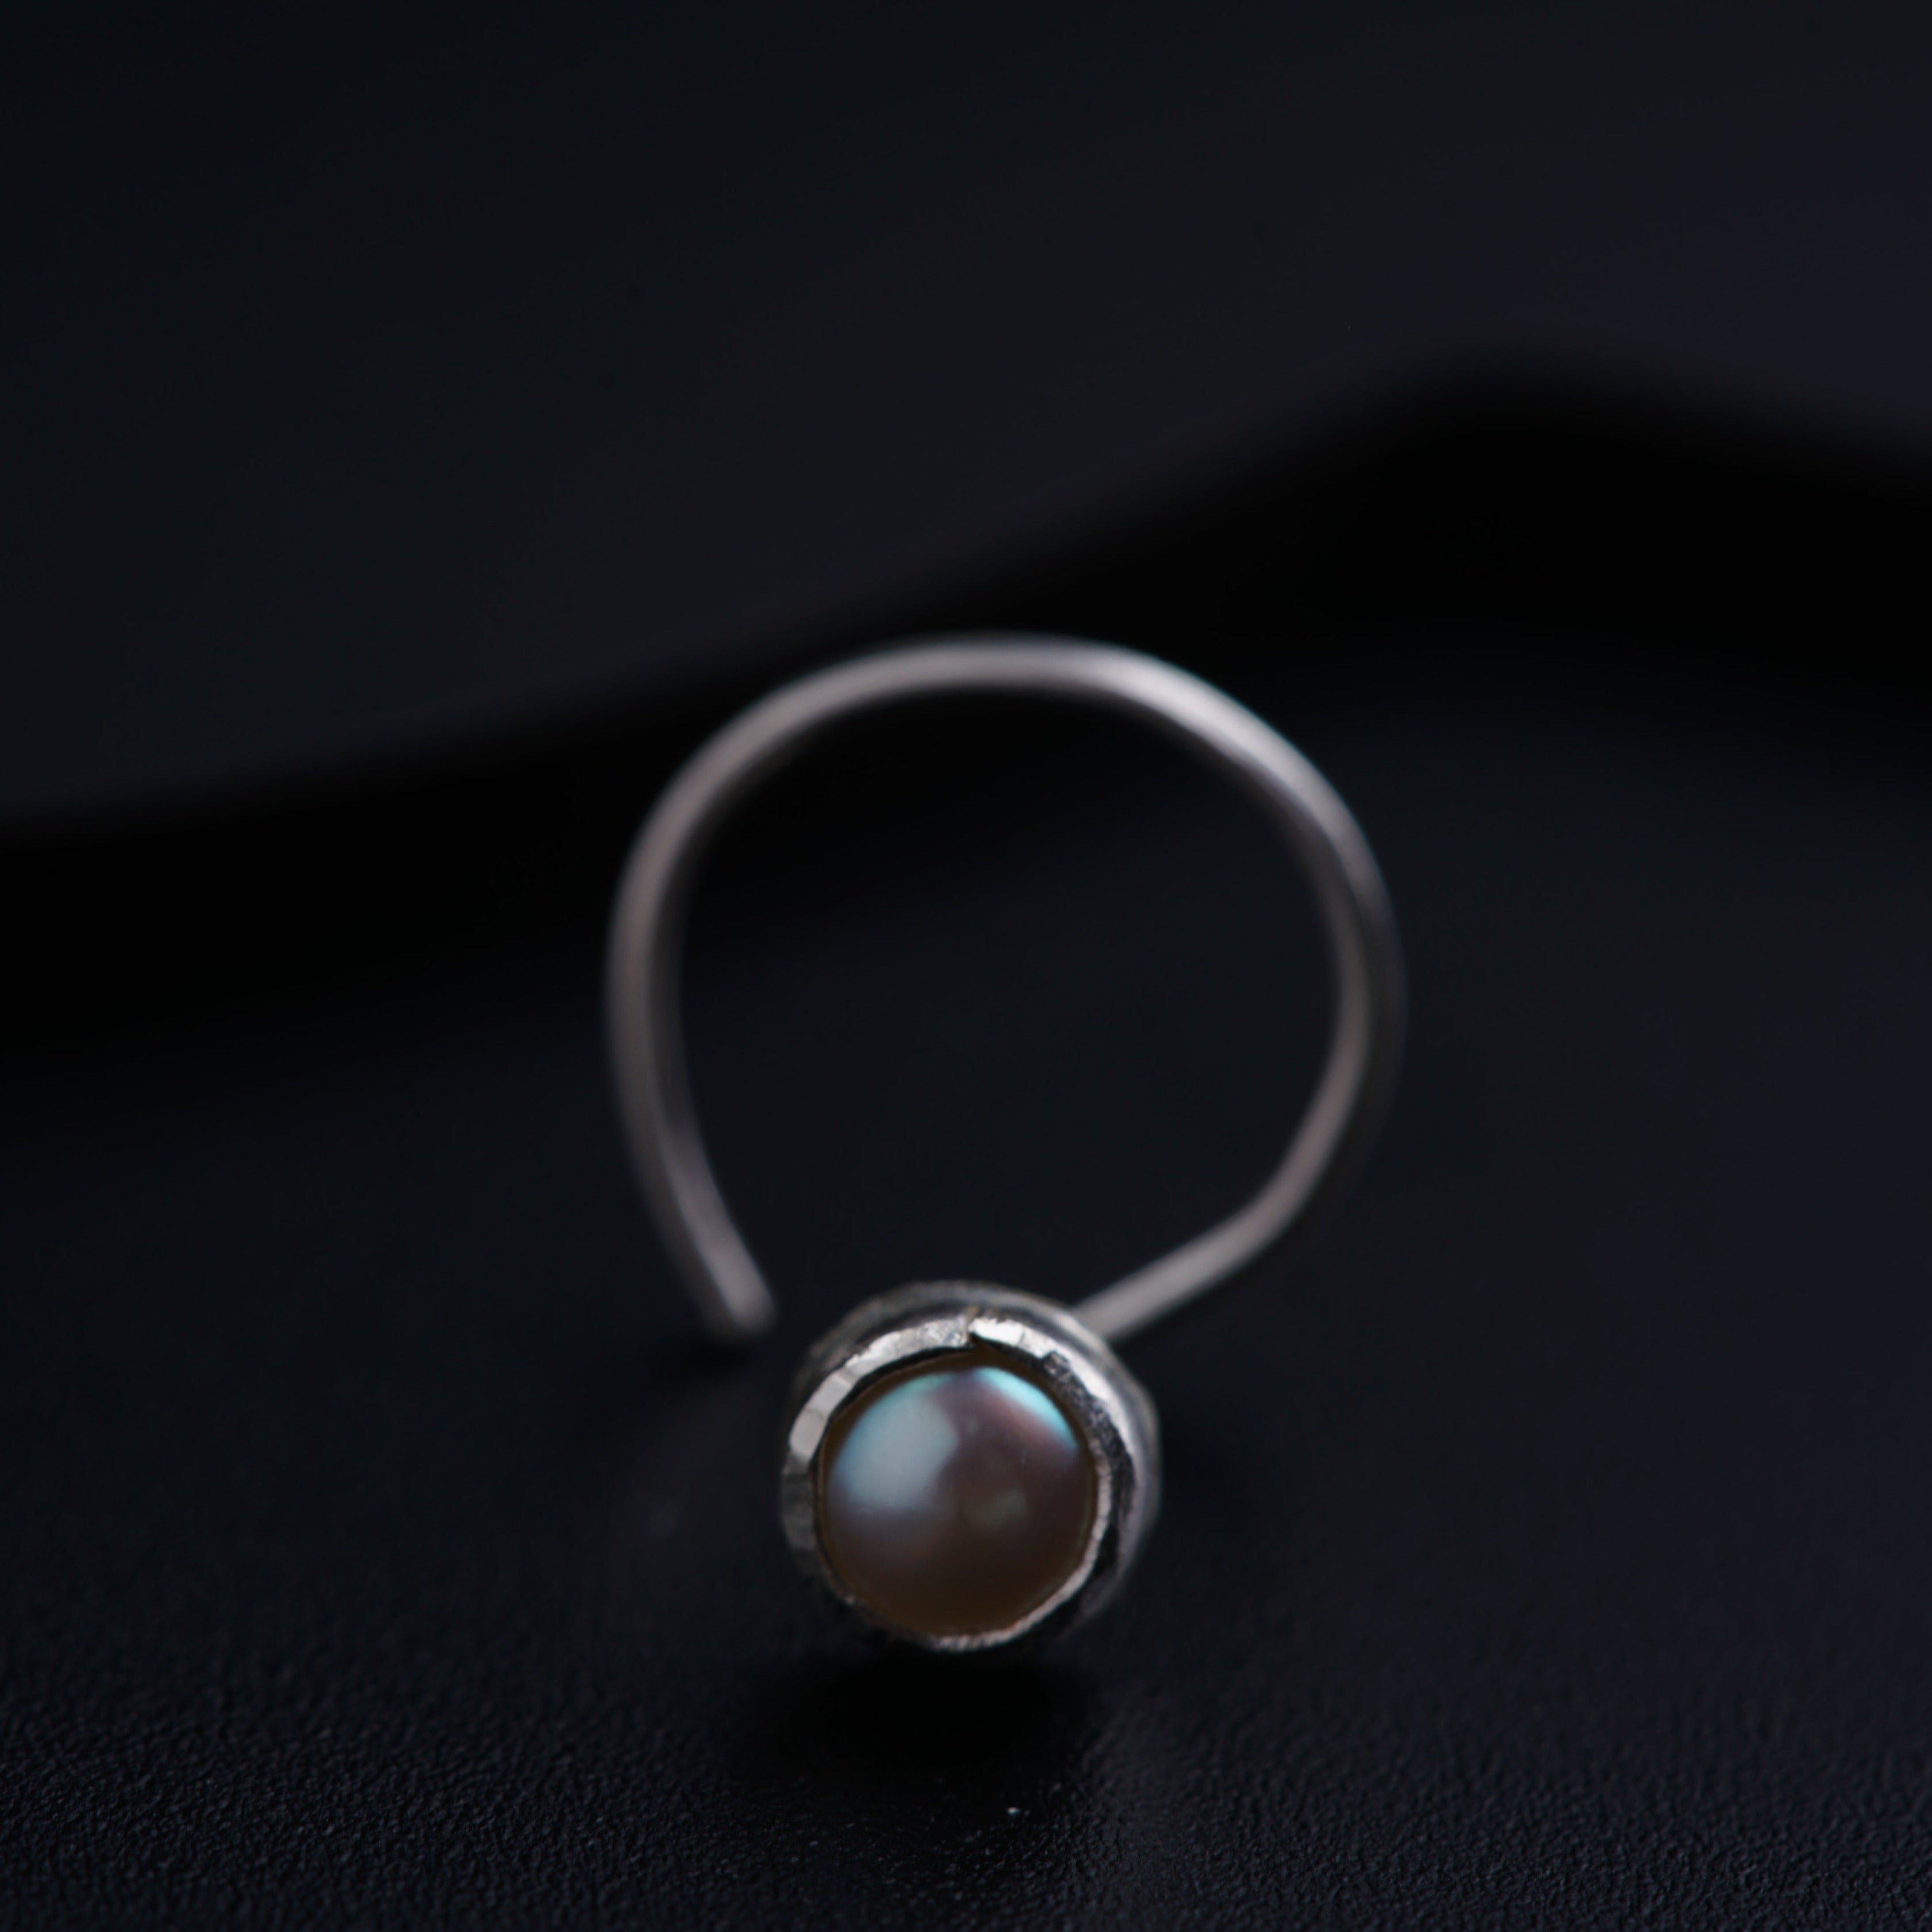 a close up of a ring with a pearl on it